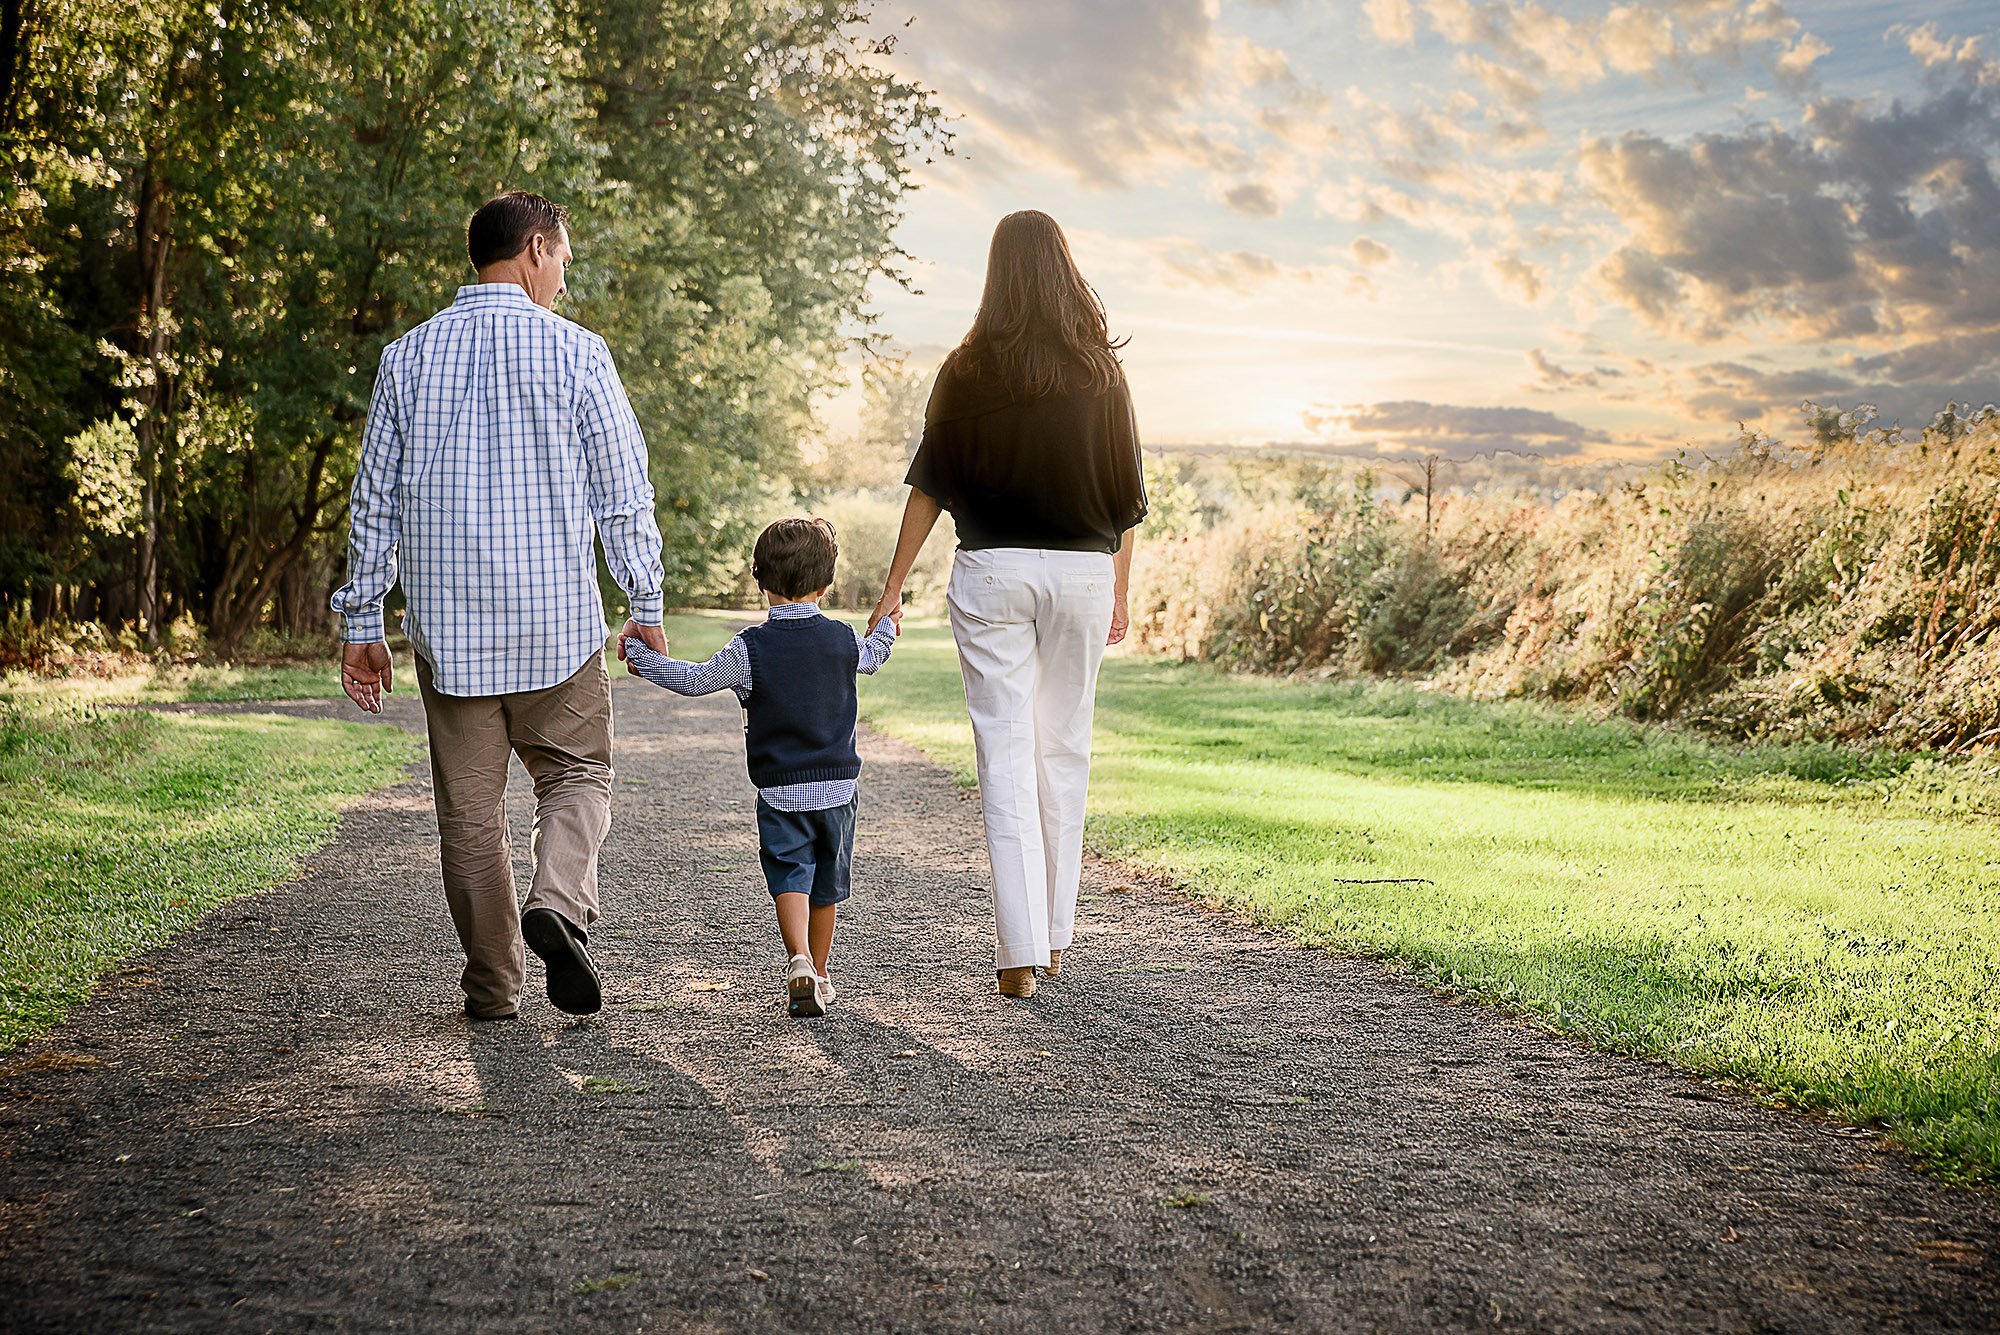 Mom, Dad and young son walking on a road at sunset